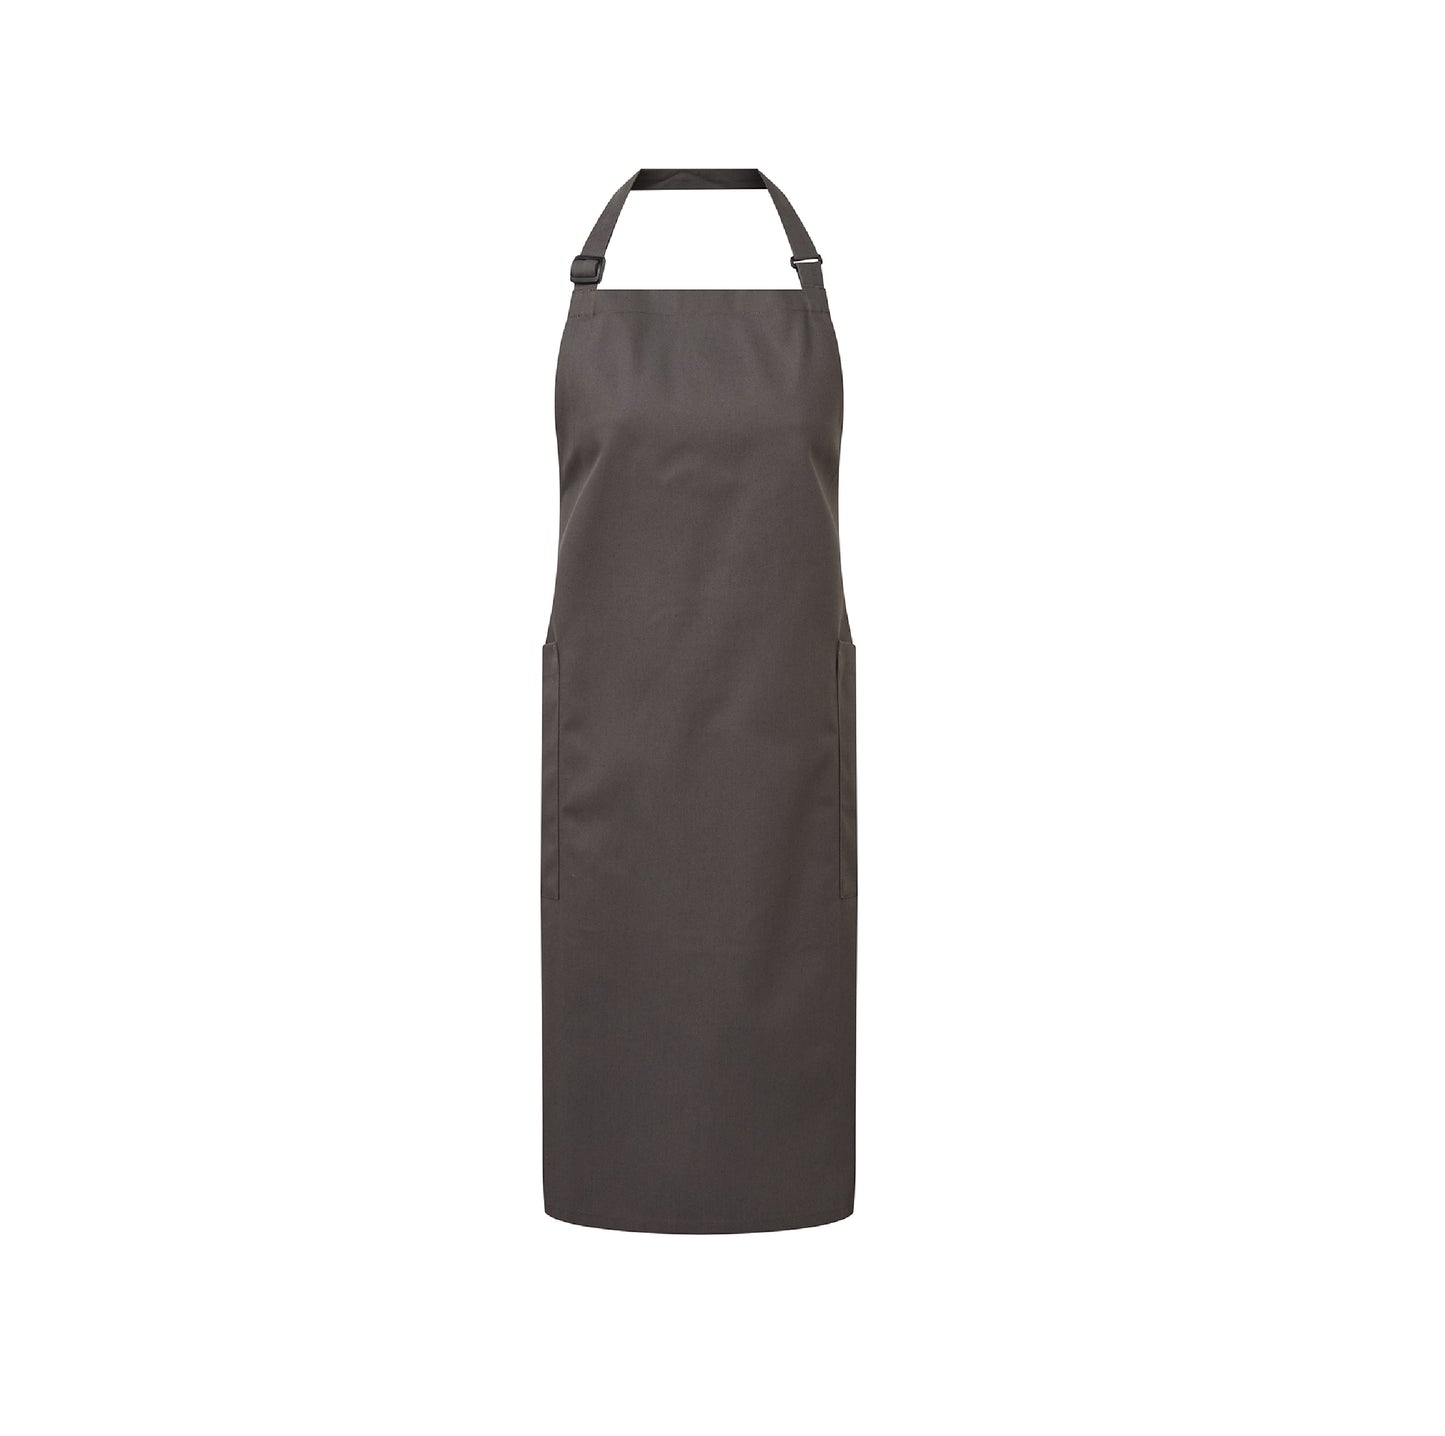 Recycled Polyester Apron and Cotton Bid Apron